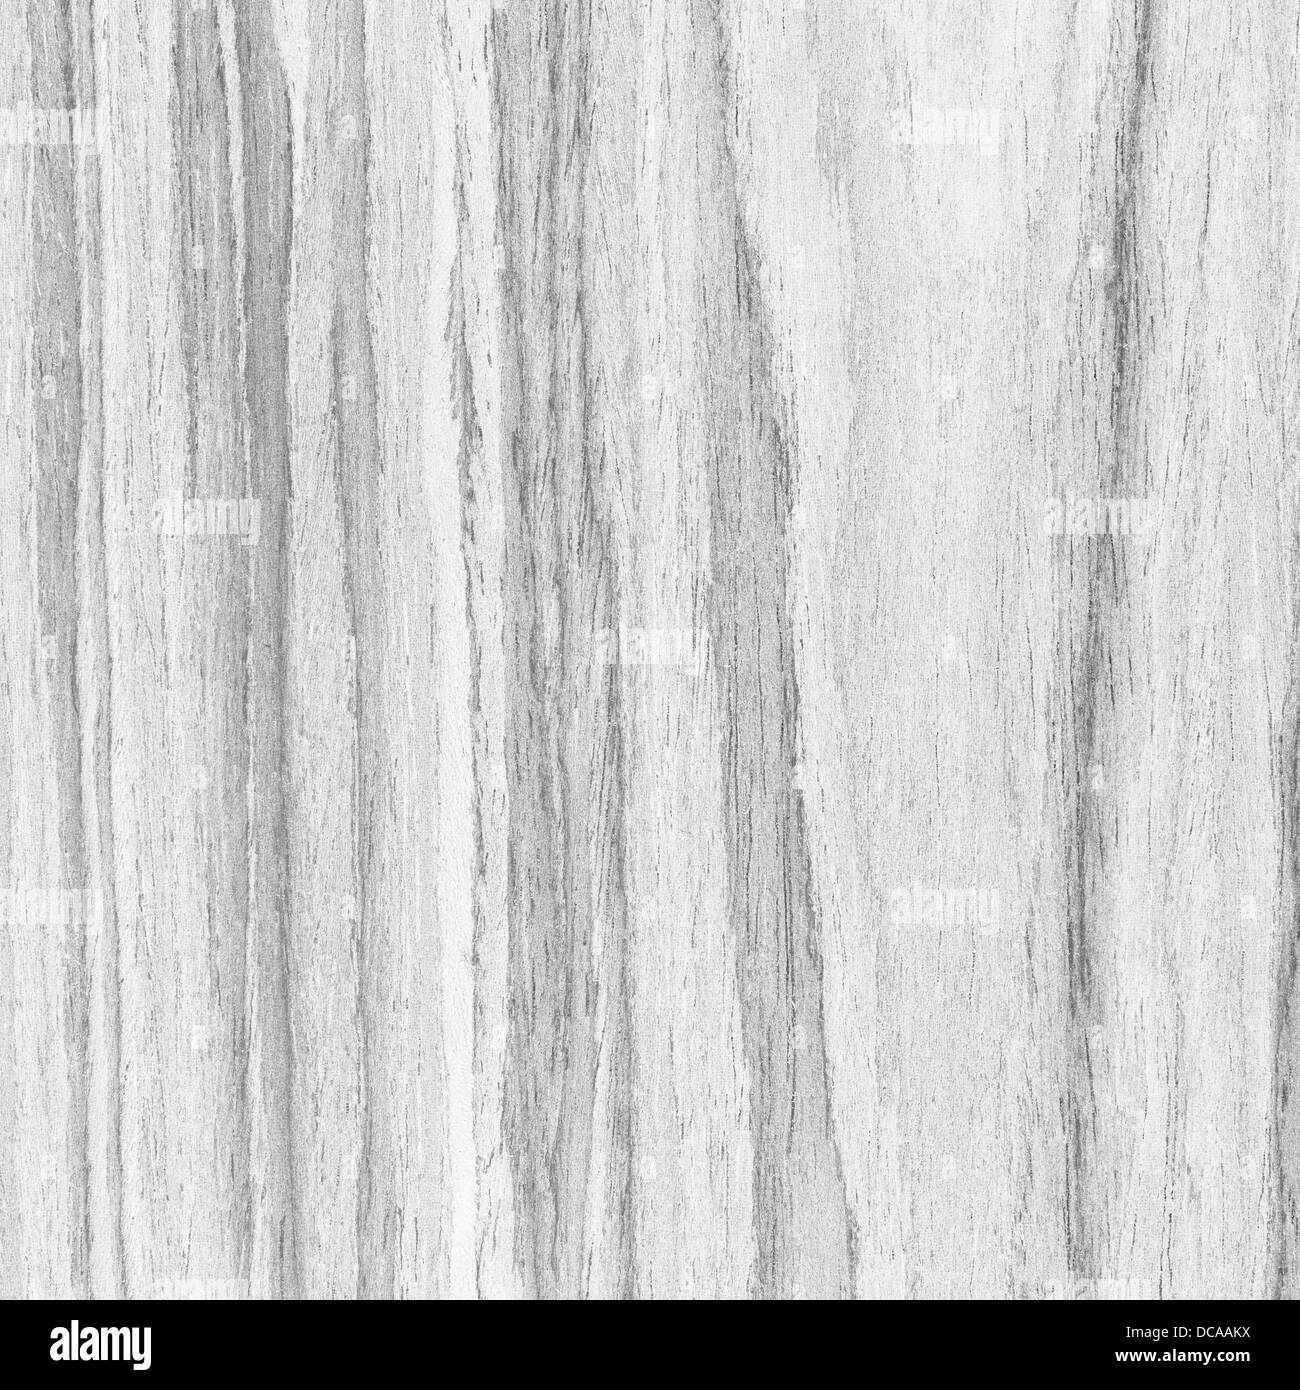 Wooden texture background Stock Photo